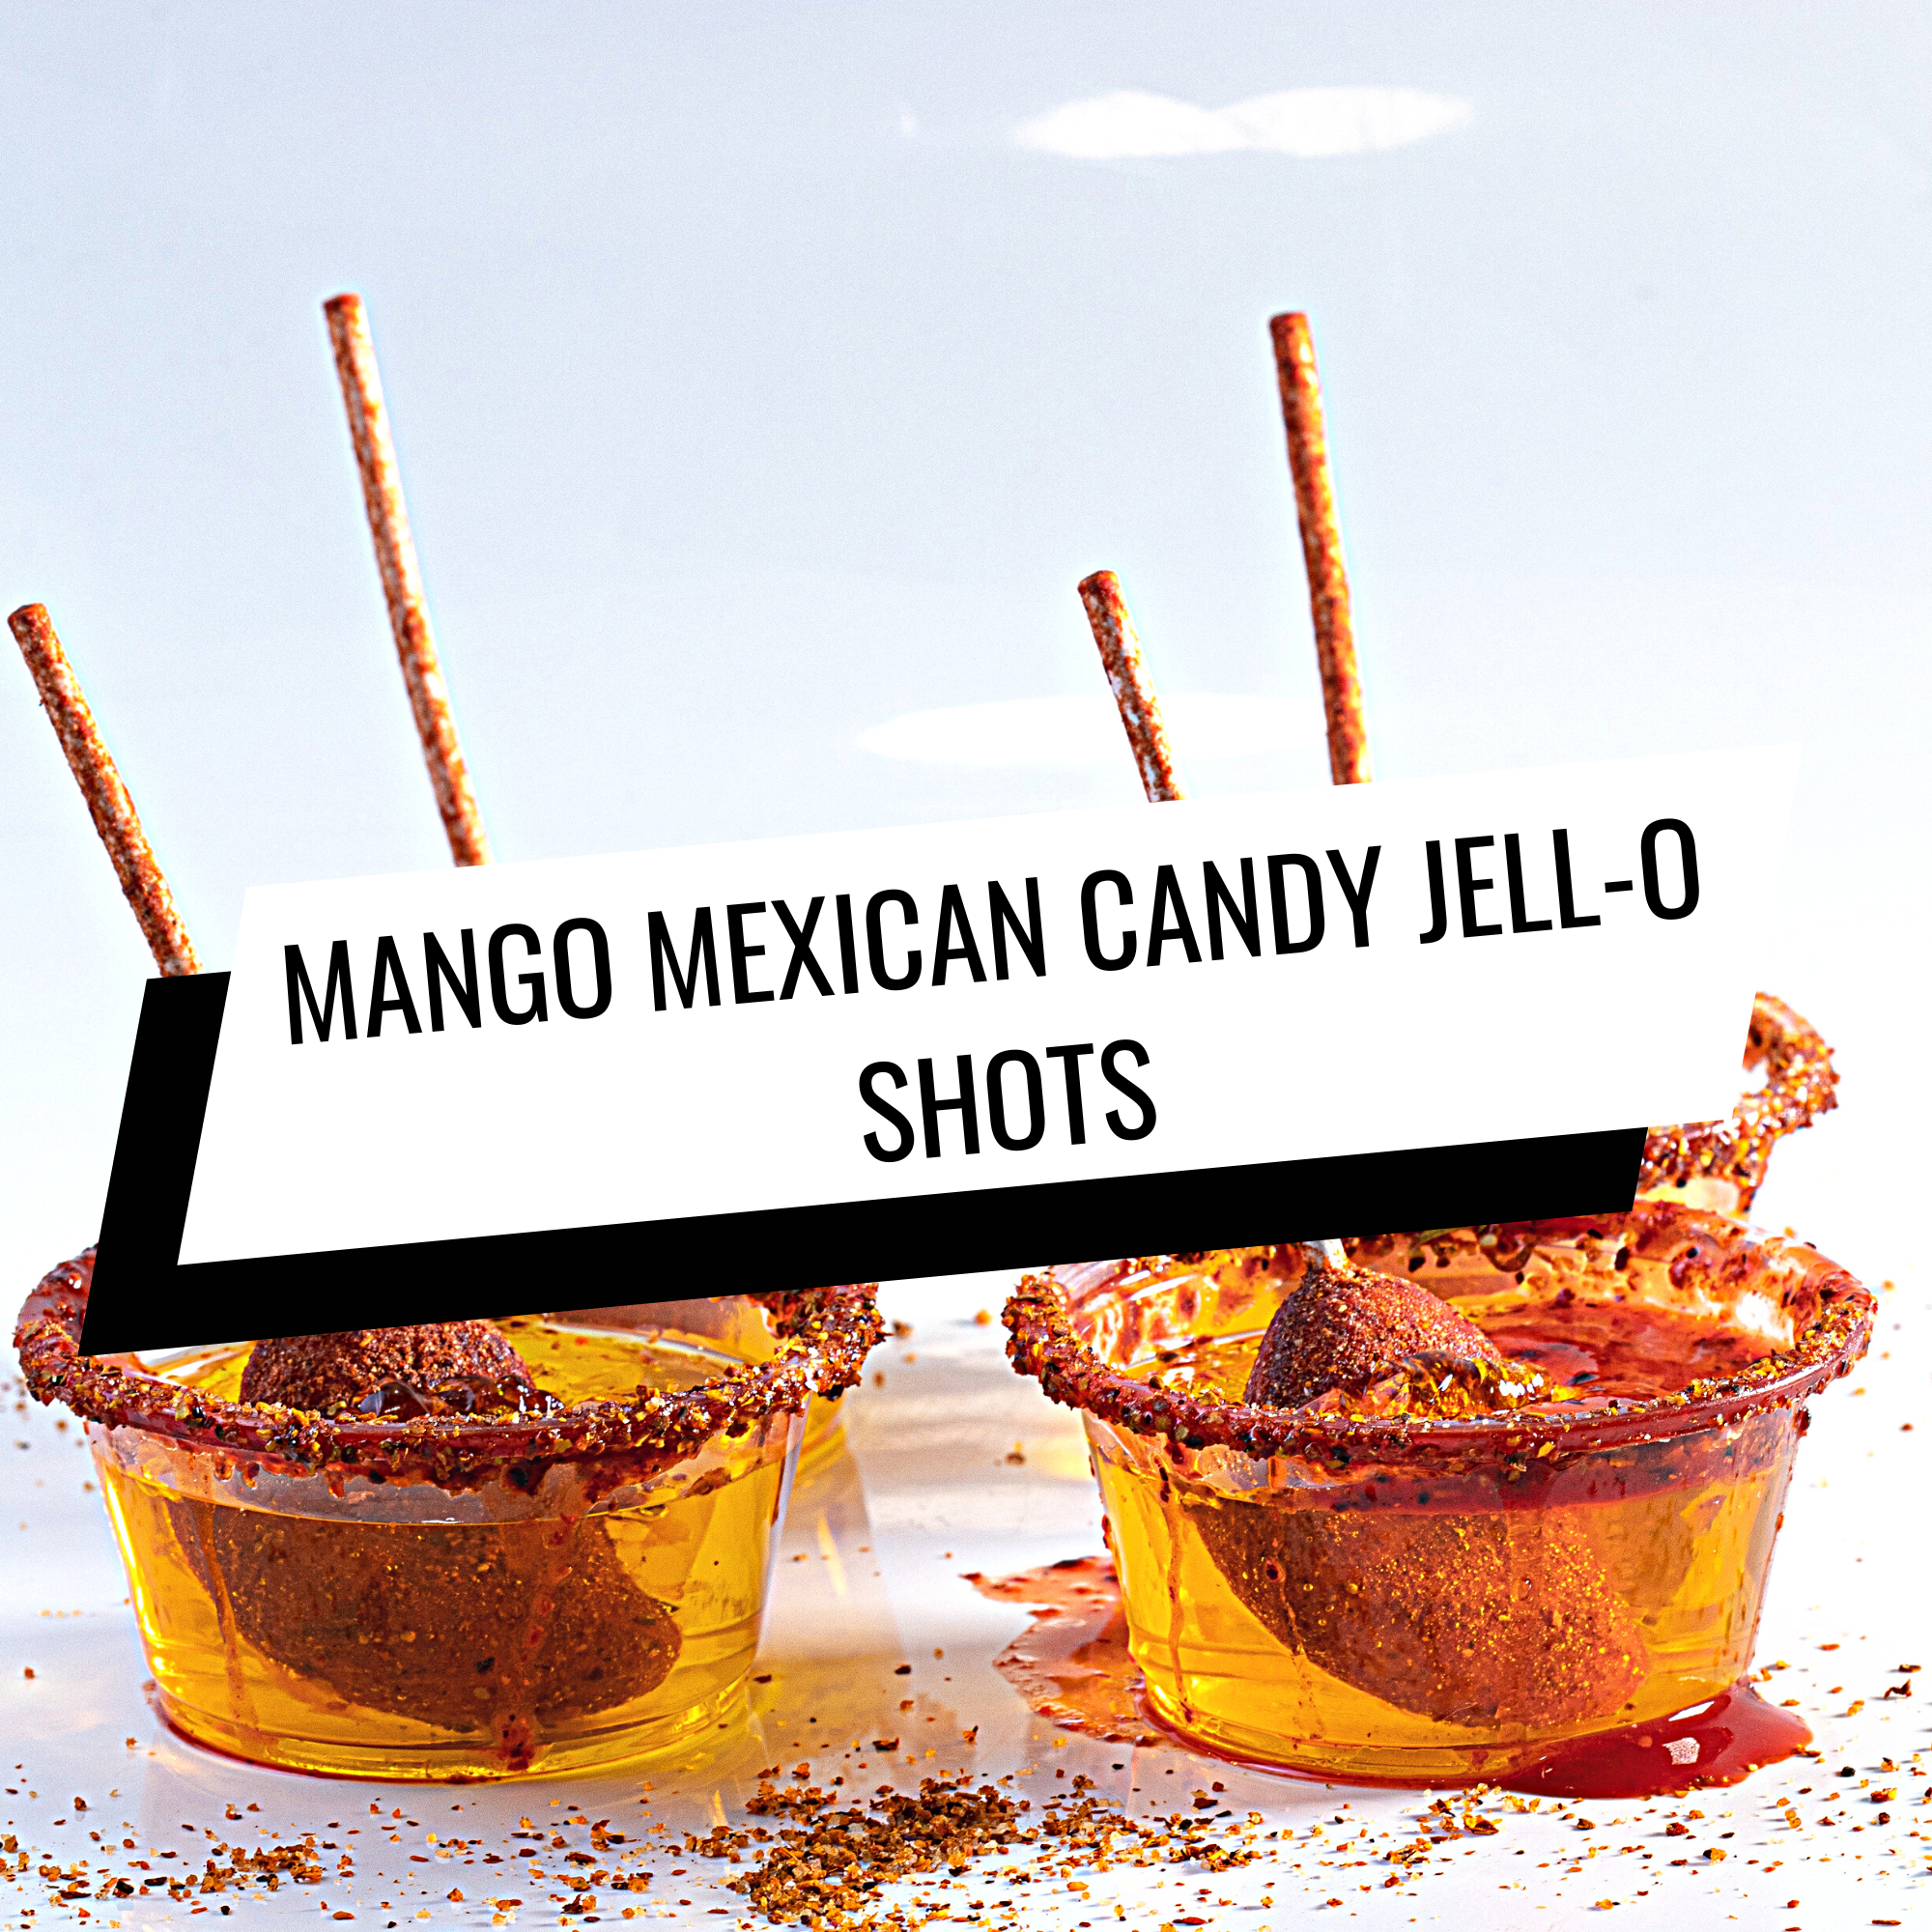 MANGO MEXICAN CANDY JELL-O SHOT